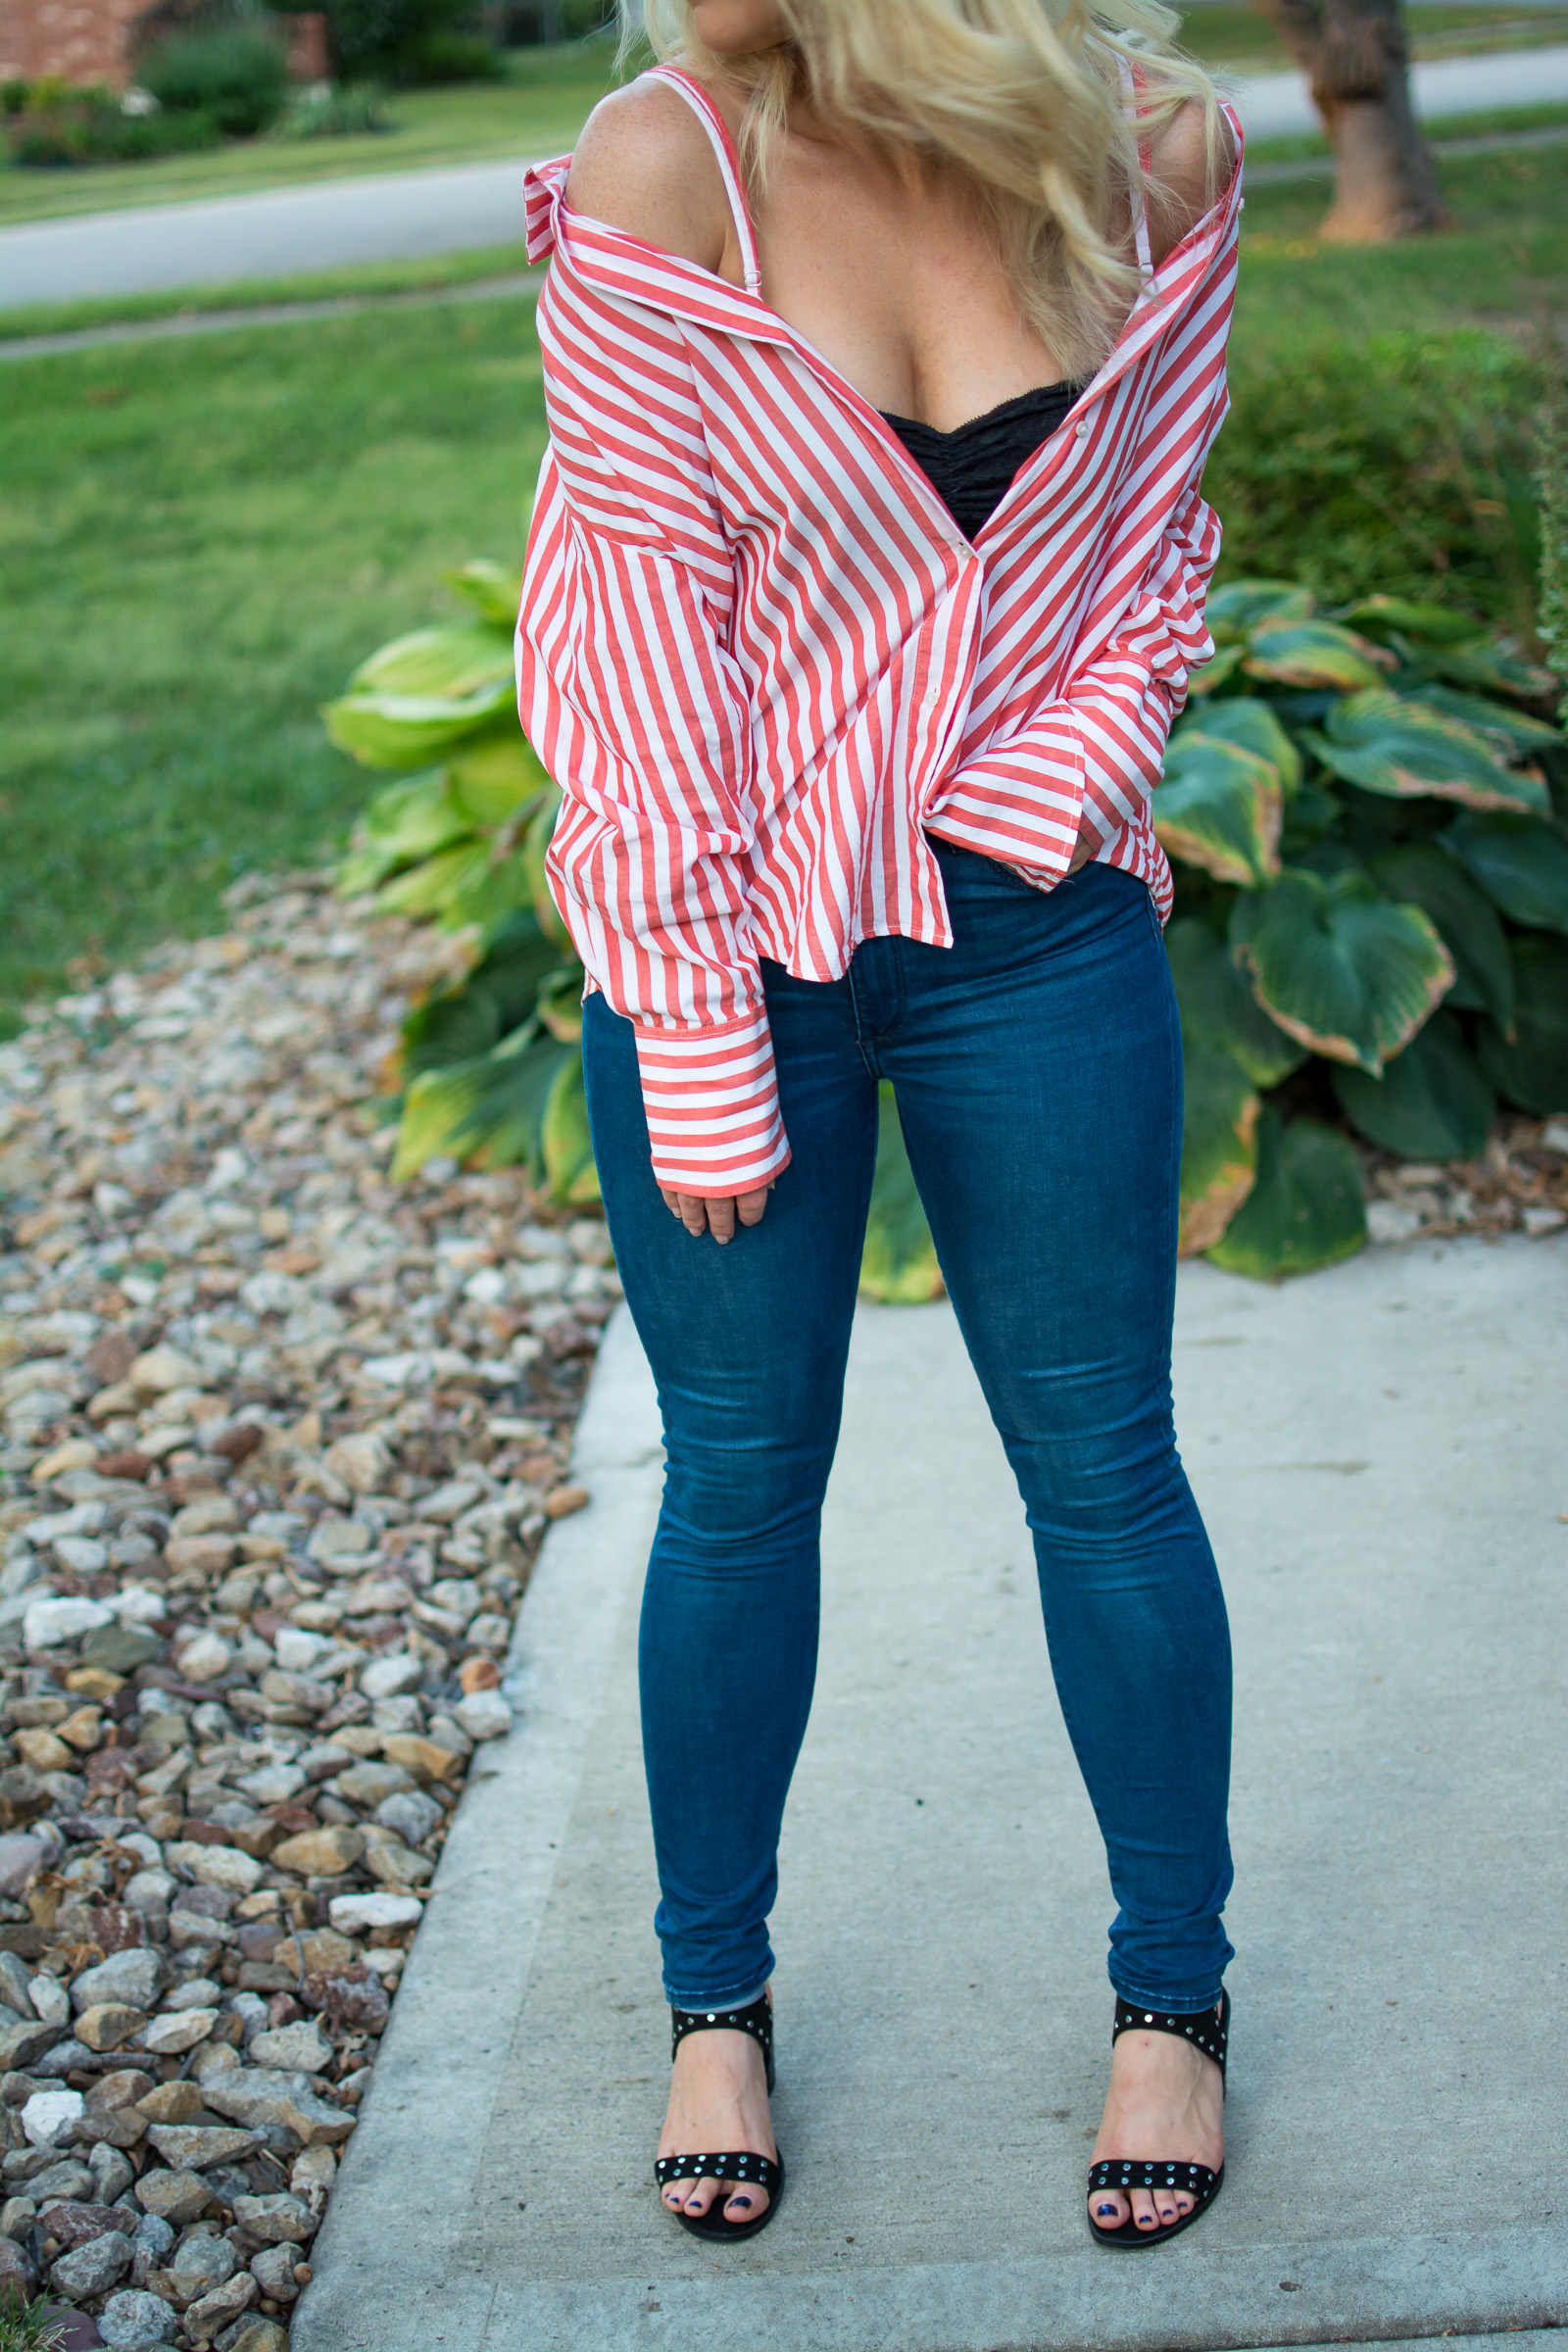 Wearing a Striped Button-up Off-the-Shoulder. | Ashley from LSR